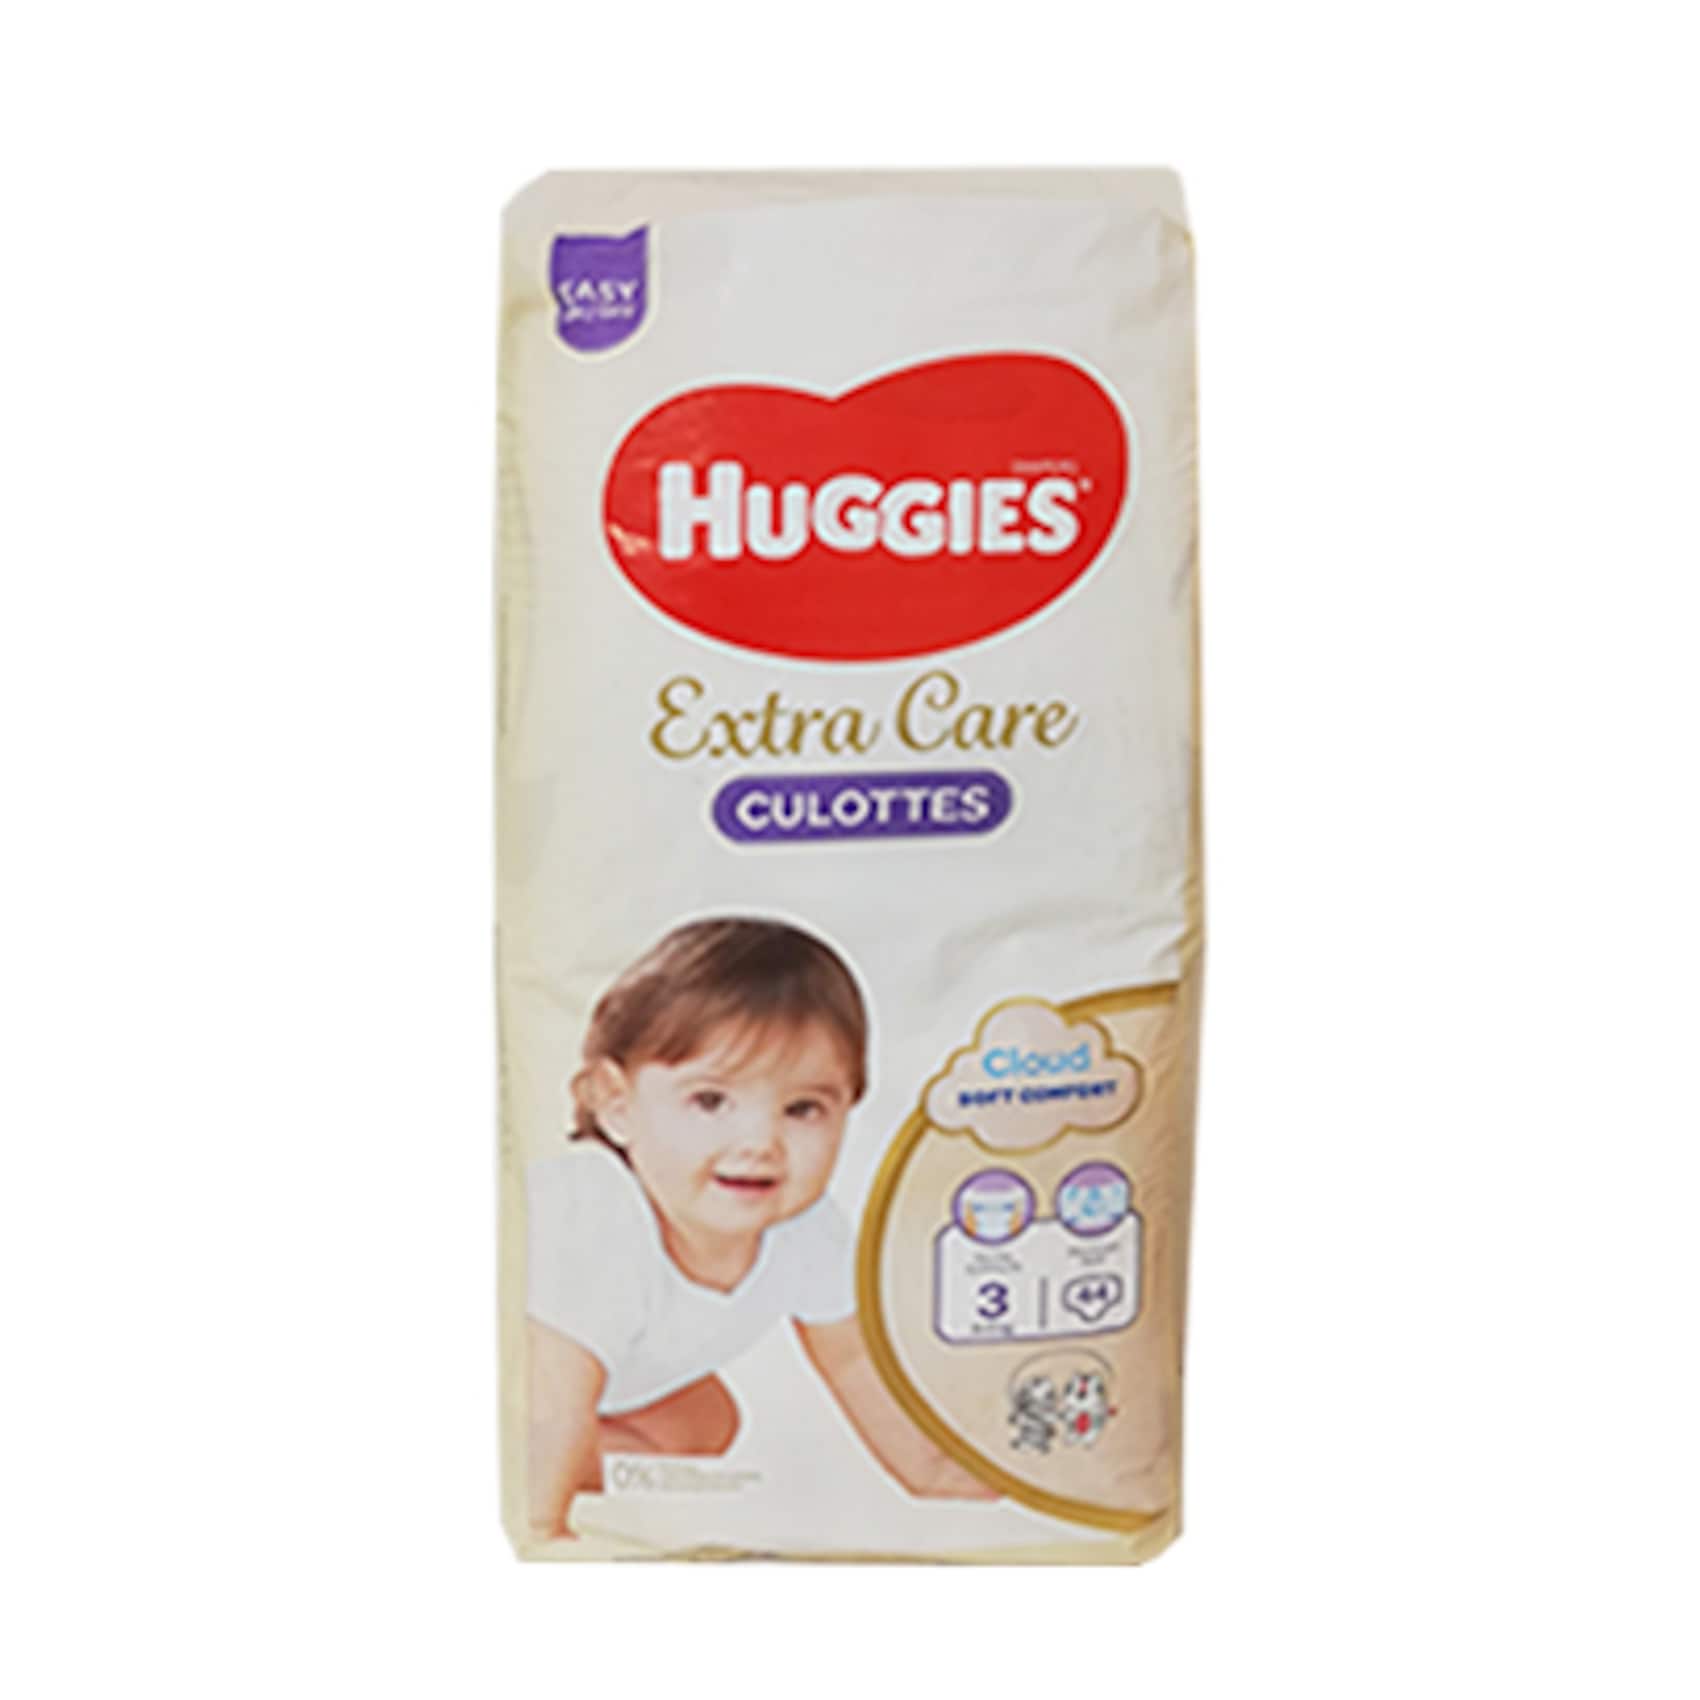 Buy Huggies Extra Care Diapers Culottes Size 3 44 Counts 6-11KG Online -  Shop Baby Products on Carrefour Lebanon